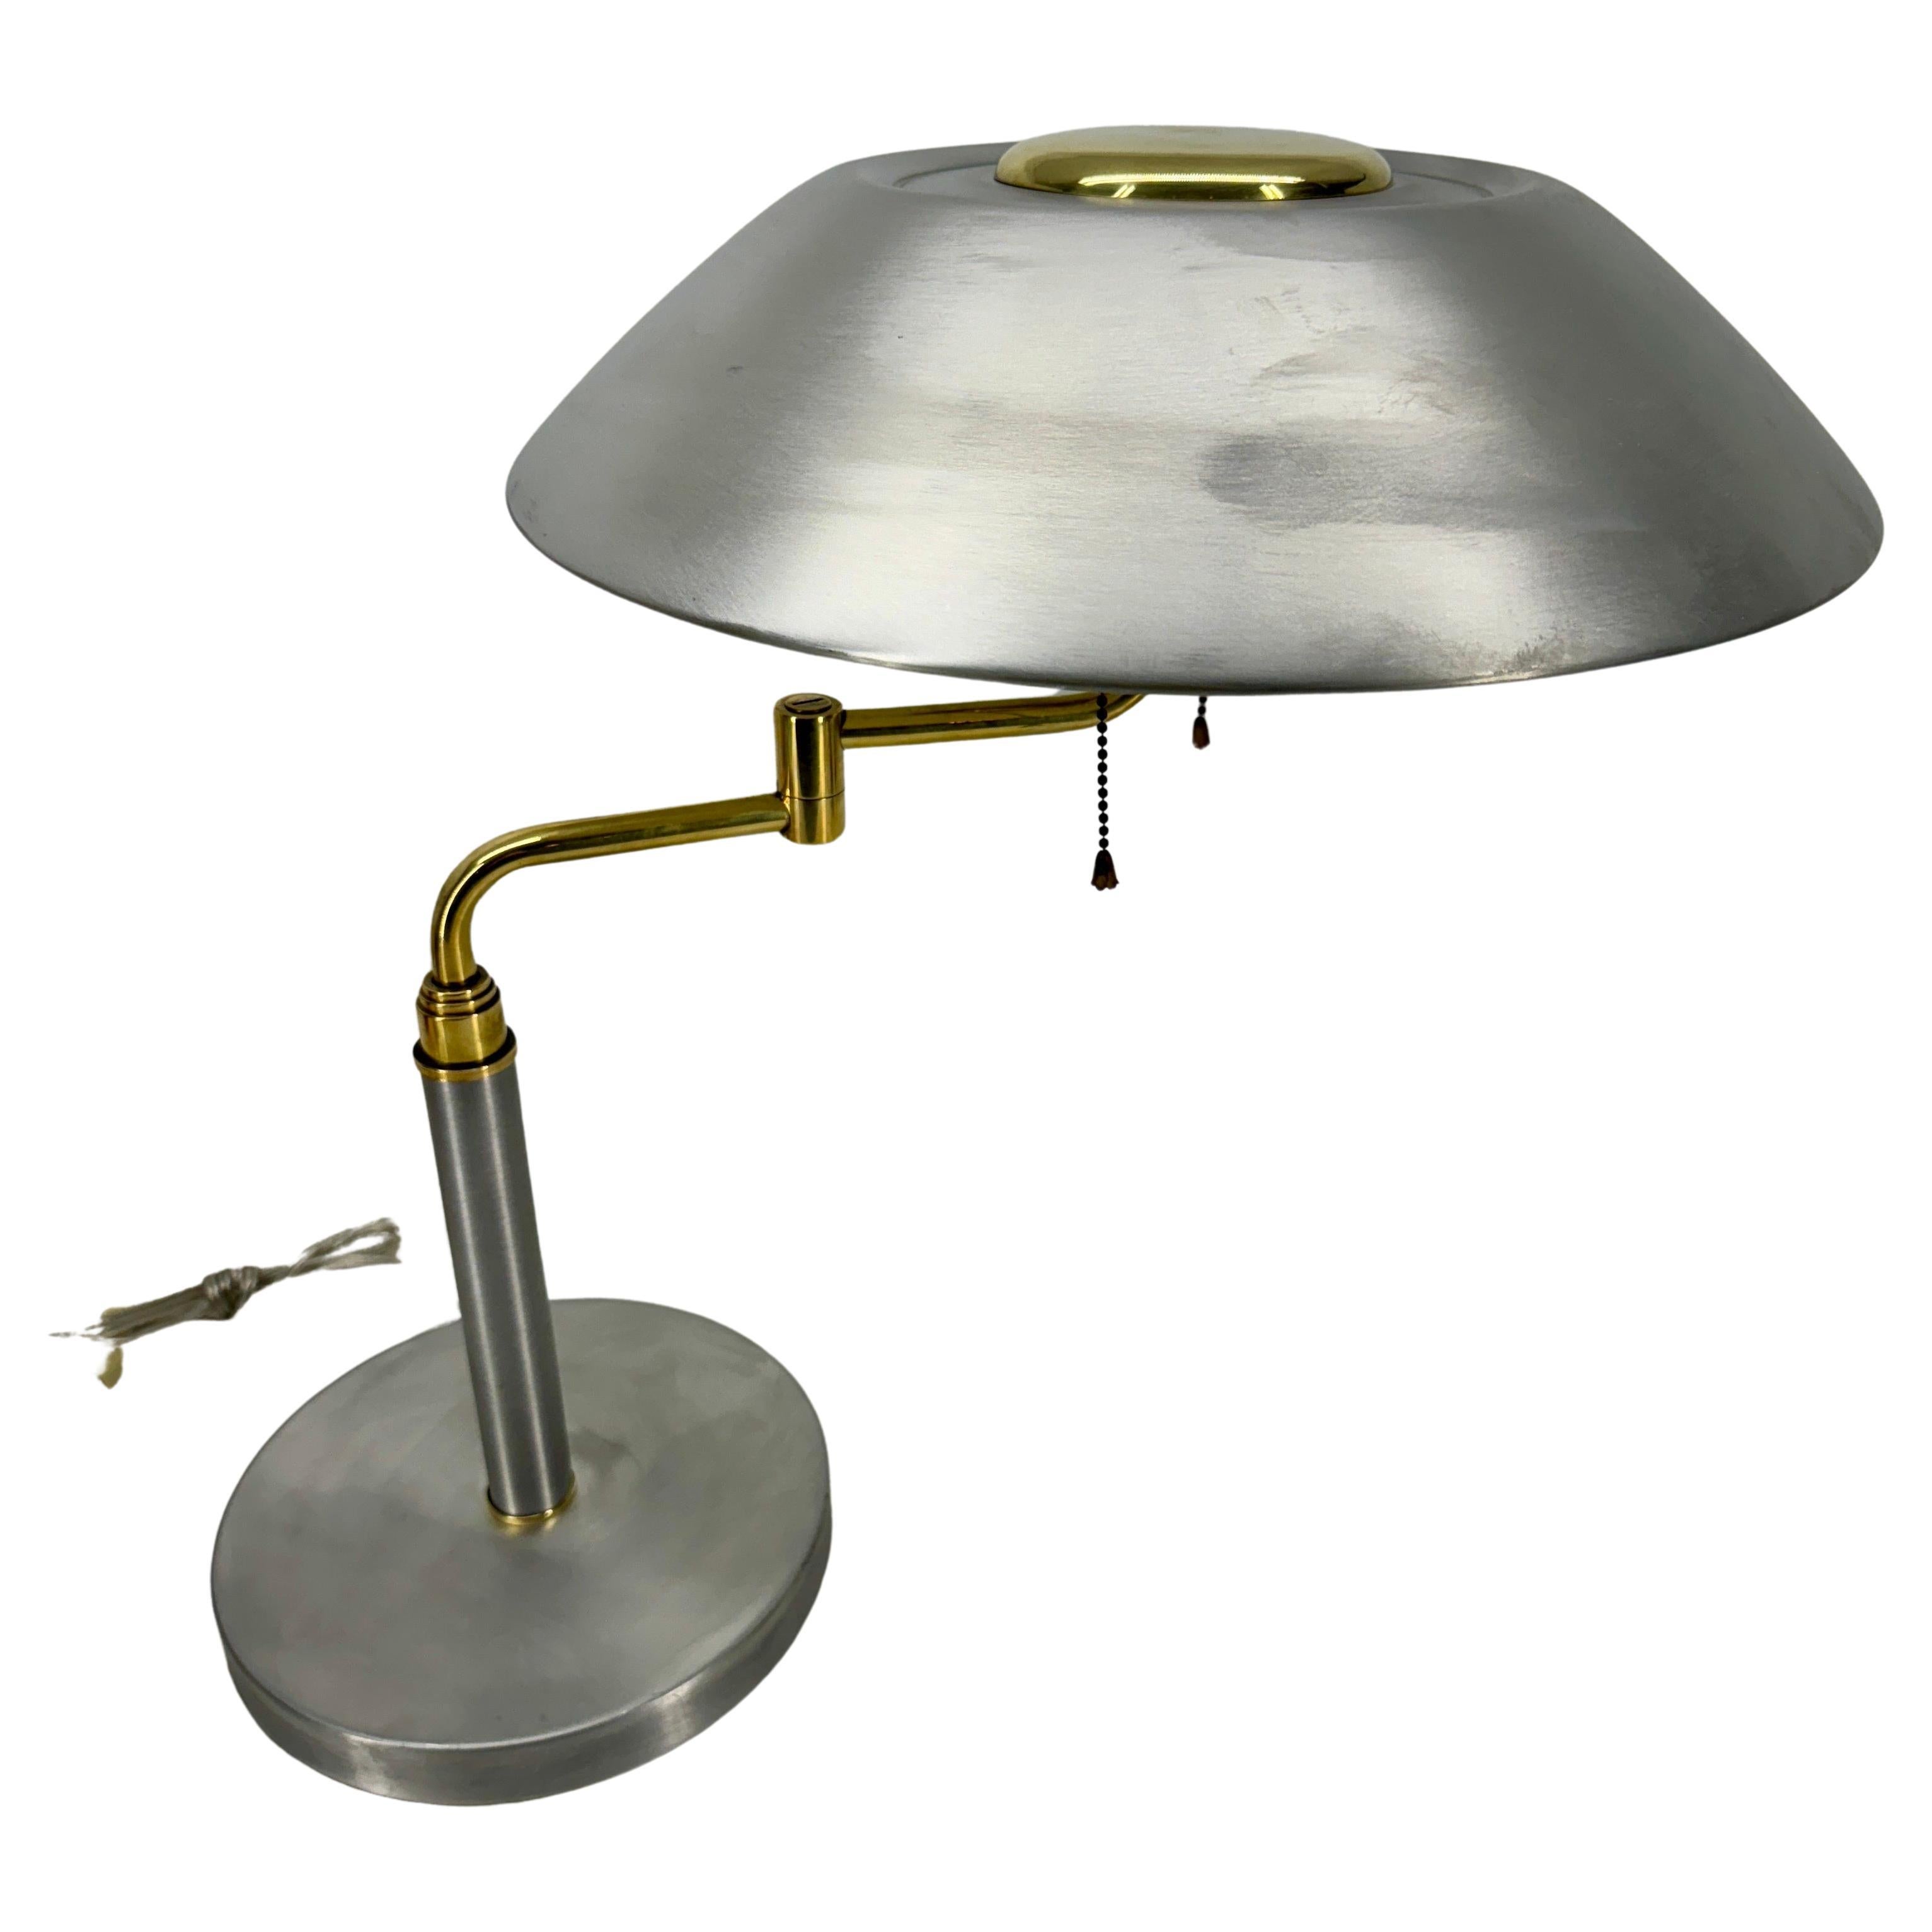 20th Century American Vintage Mid-Century Modern Desk Lamp in Aluminum and Brass  For Sale